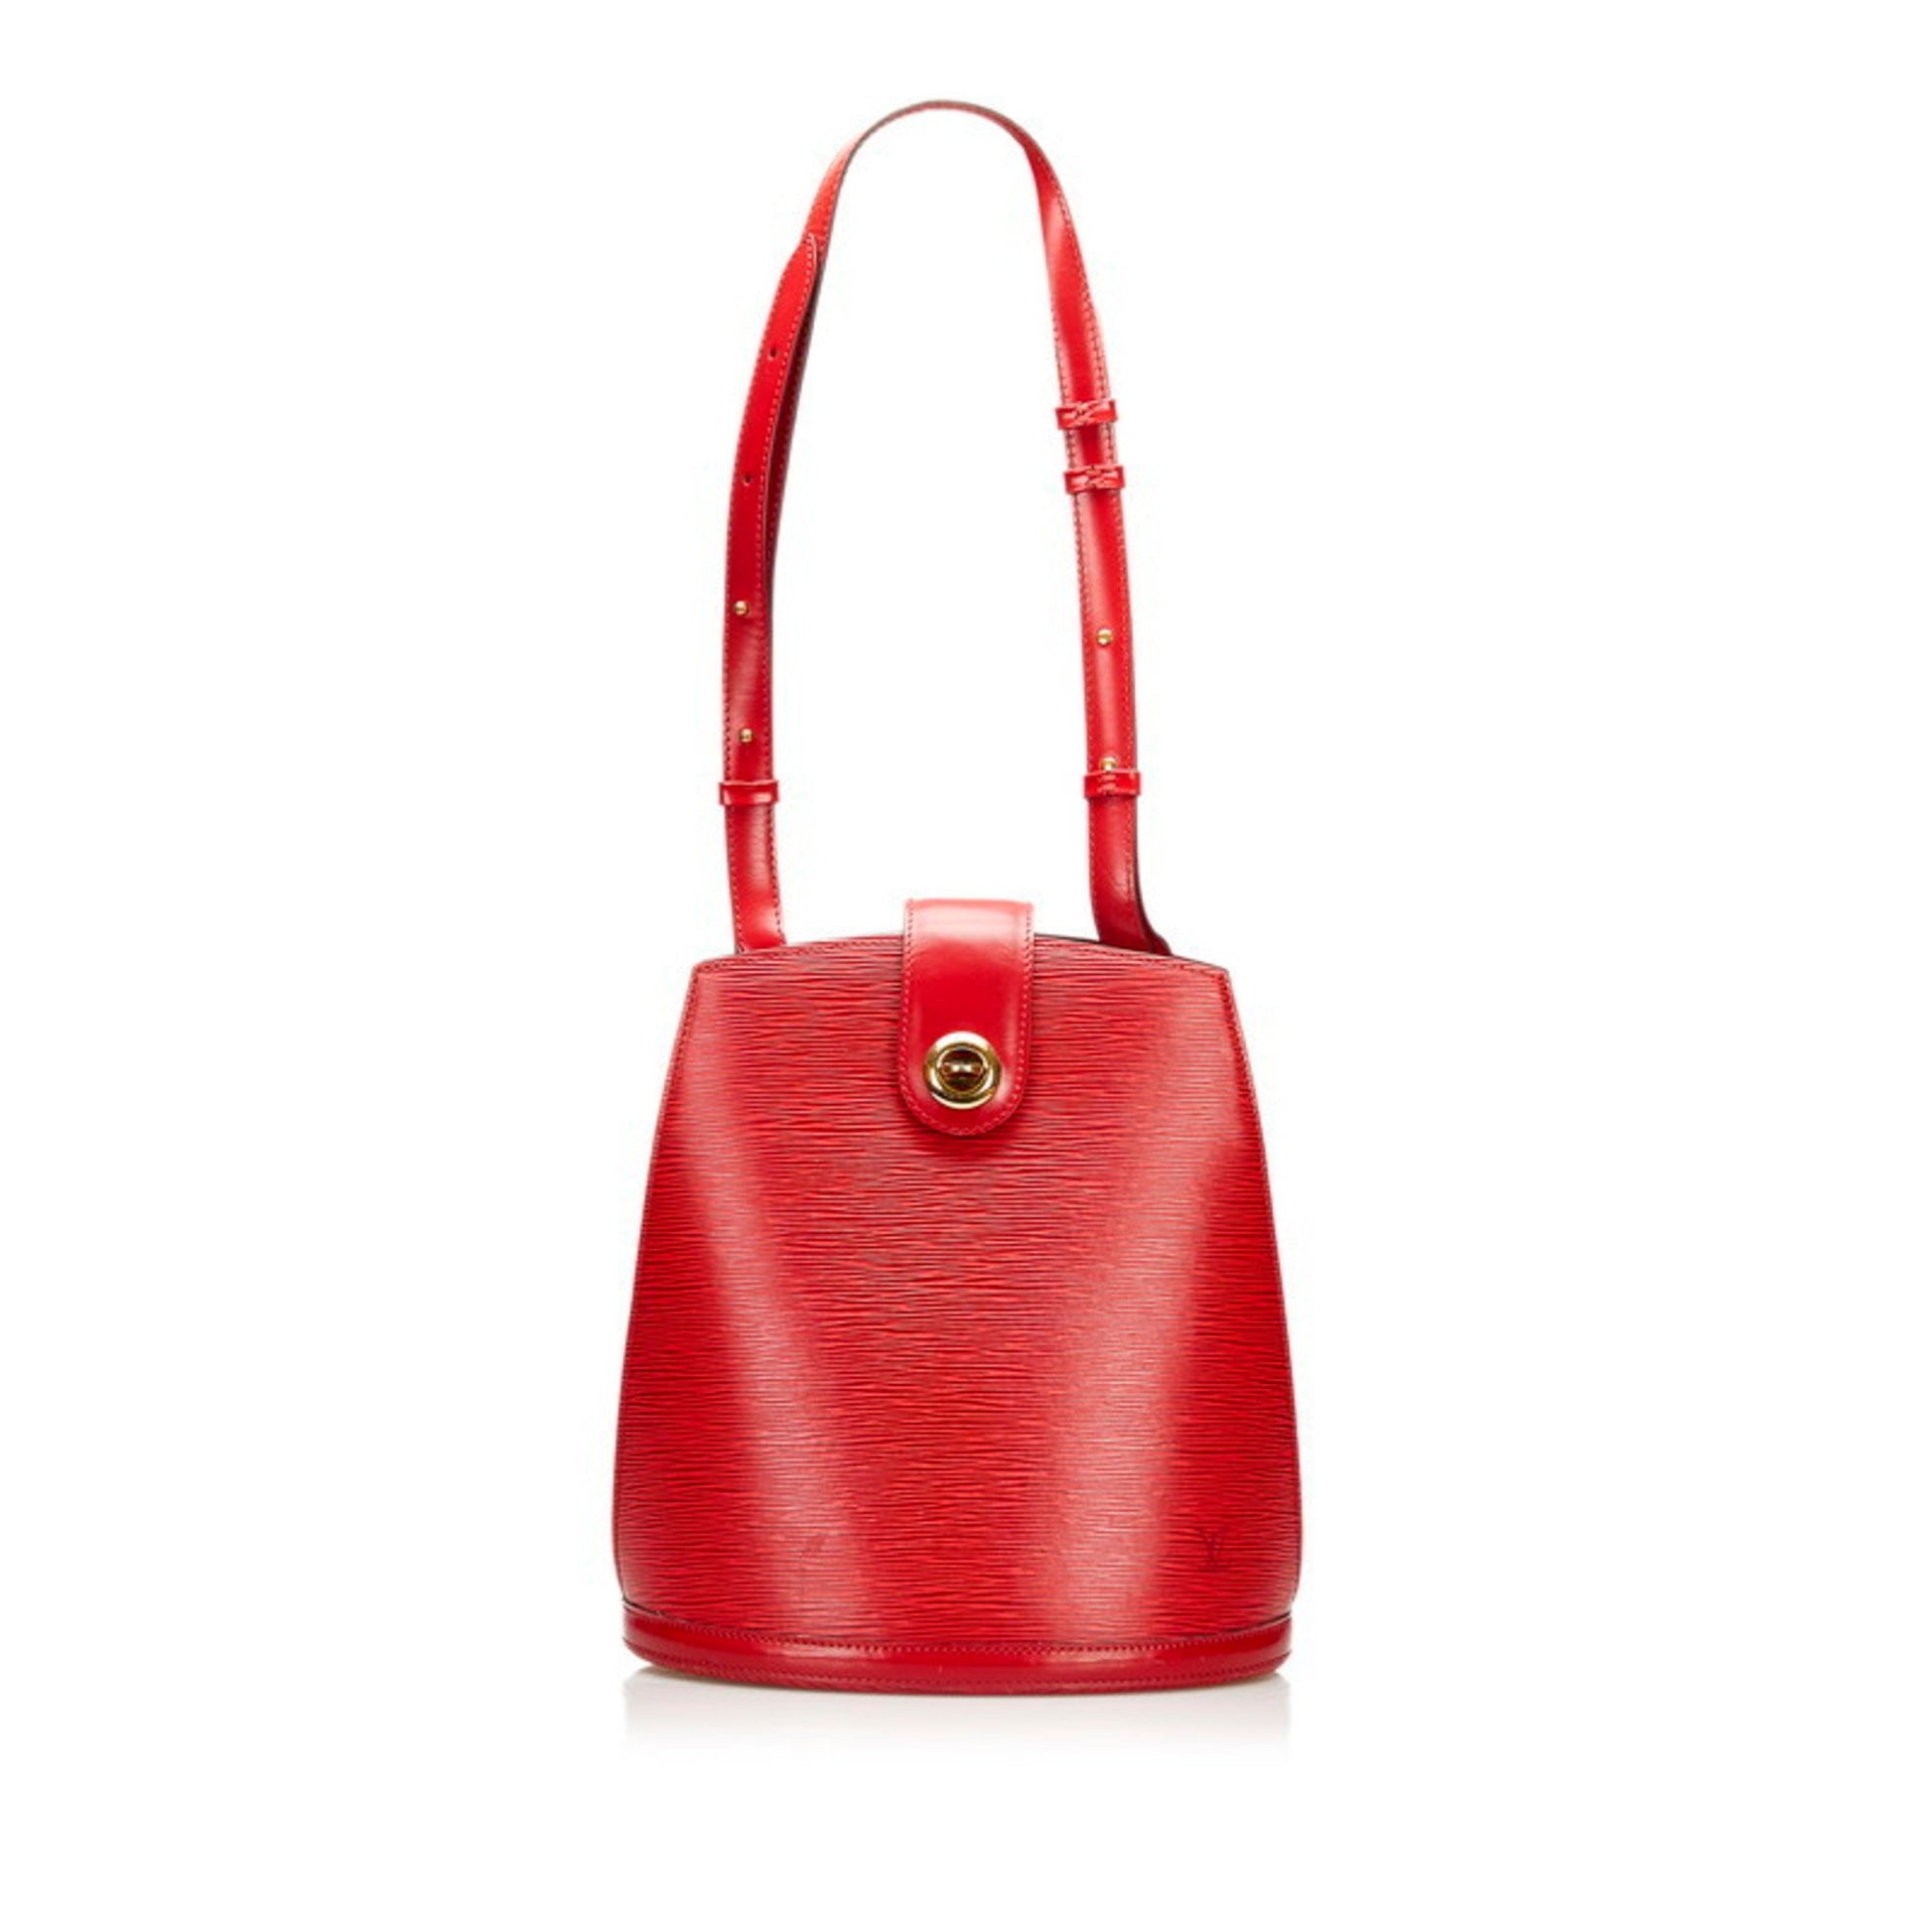 Shop for Louis Vuitton Red Epi Leather Cluny Shoulder Bag - Shipped from USA